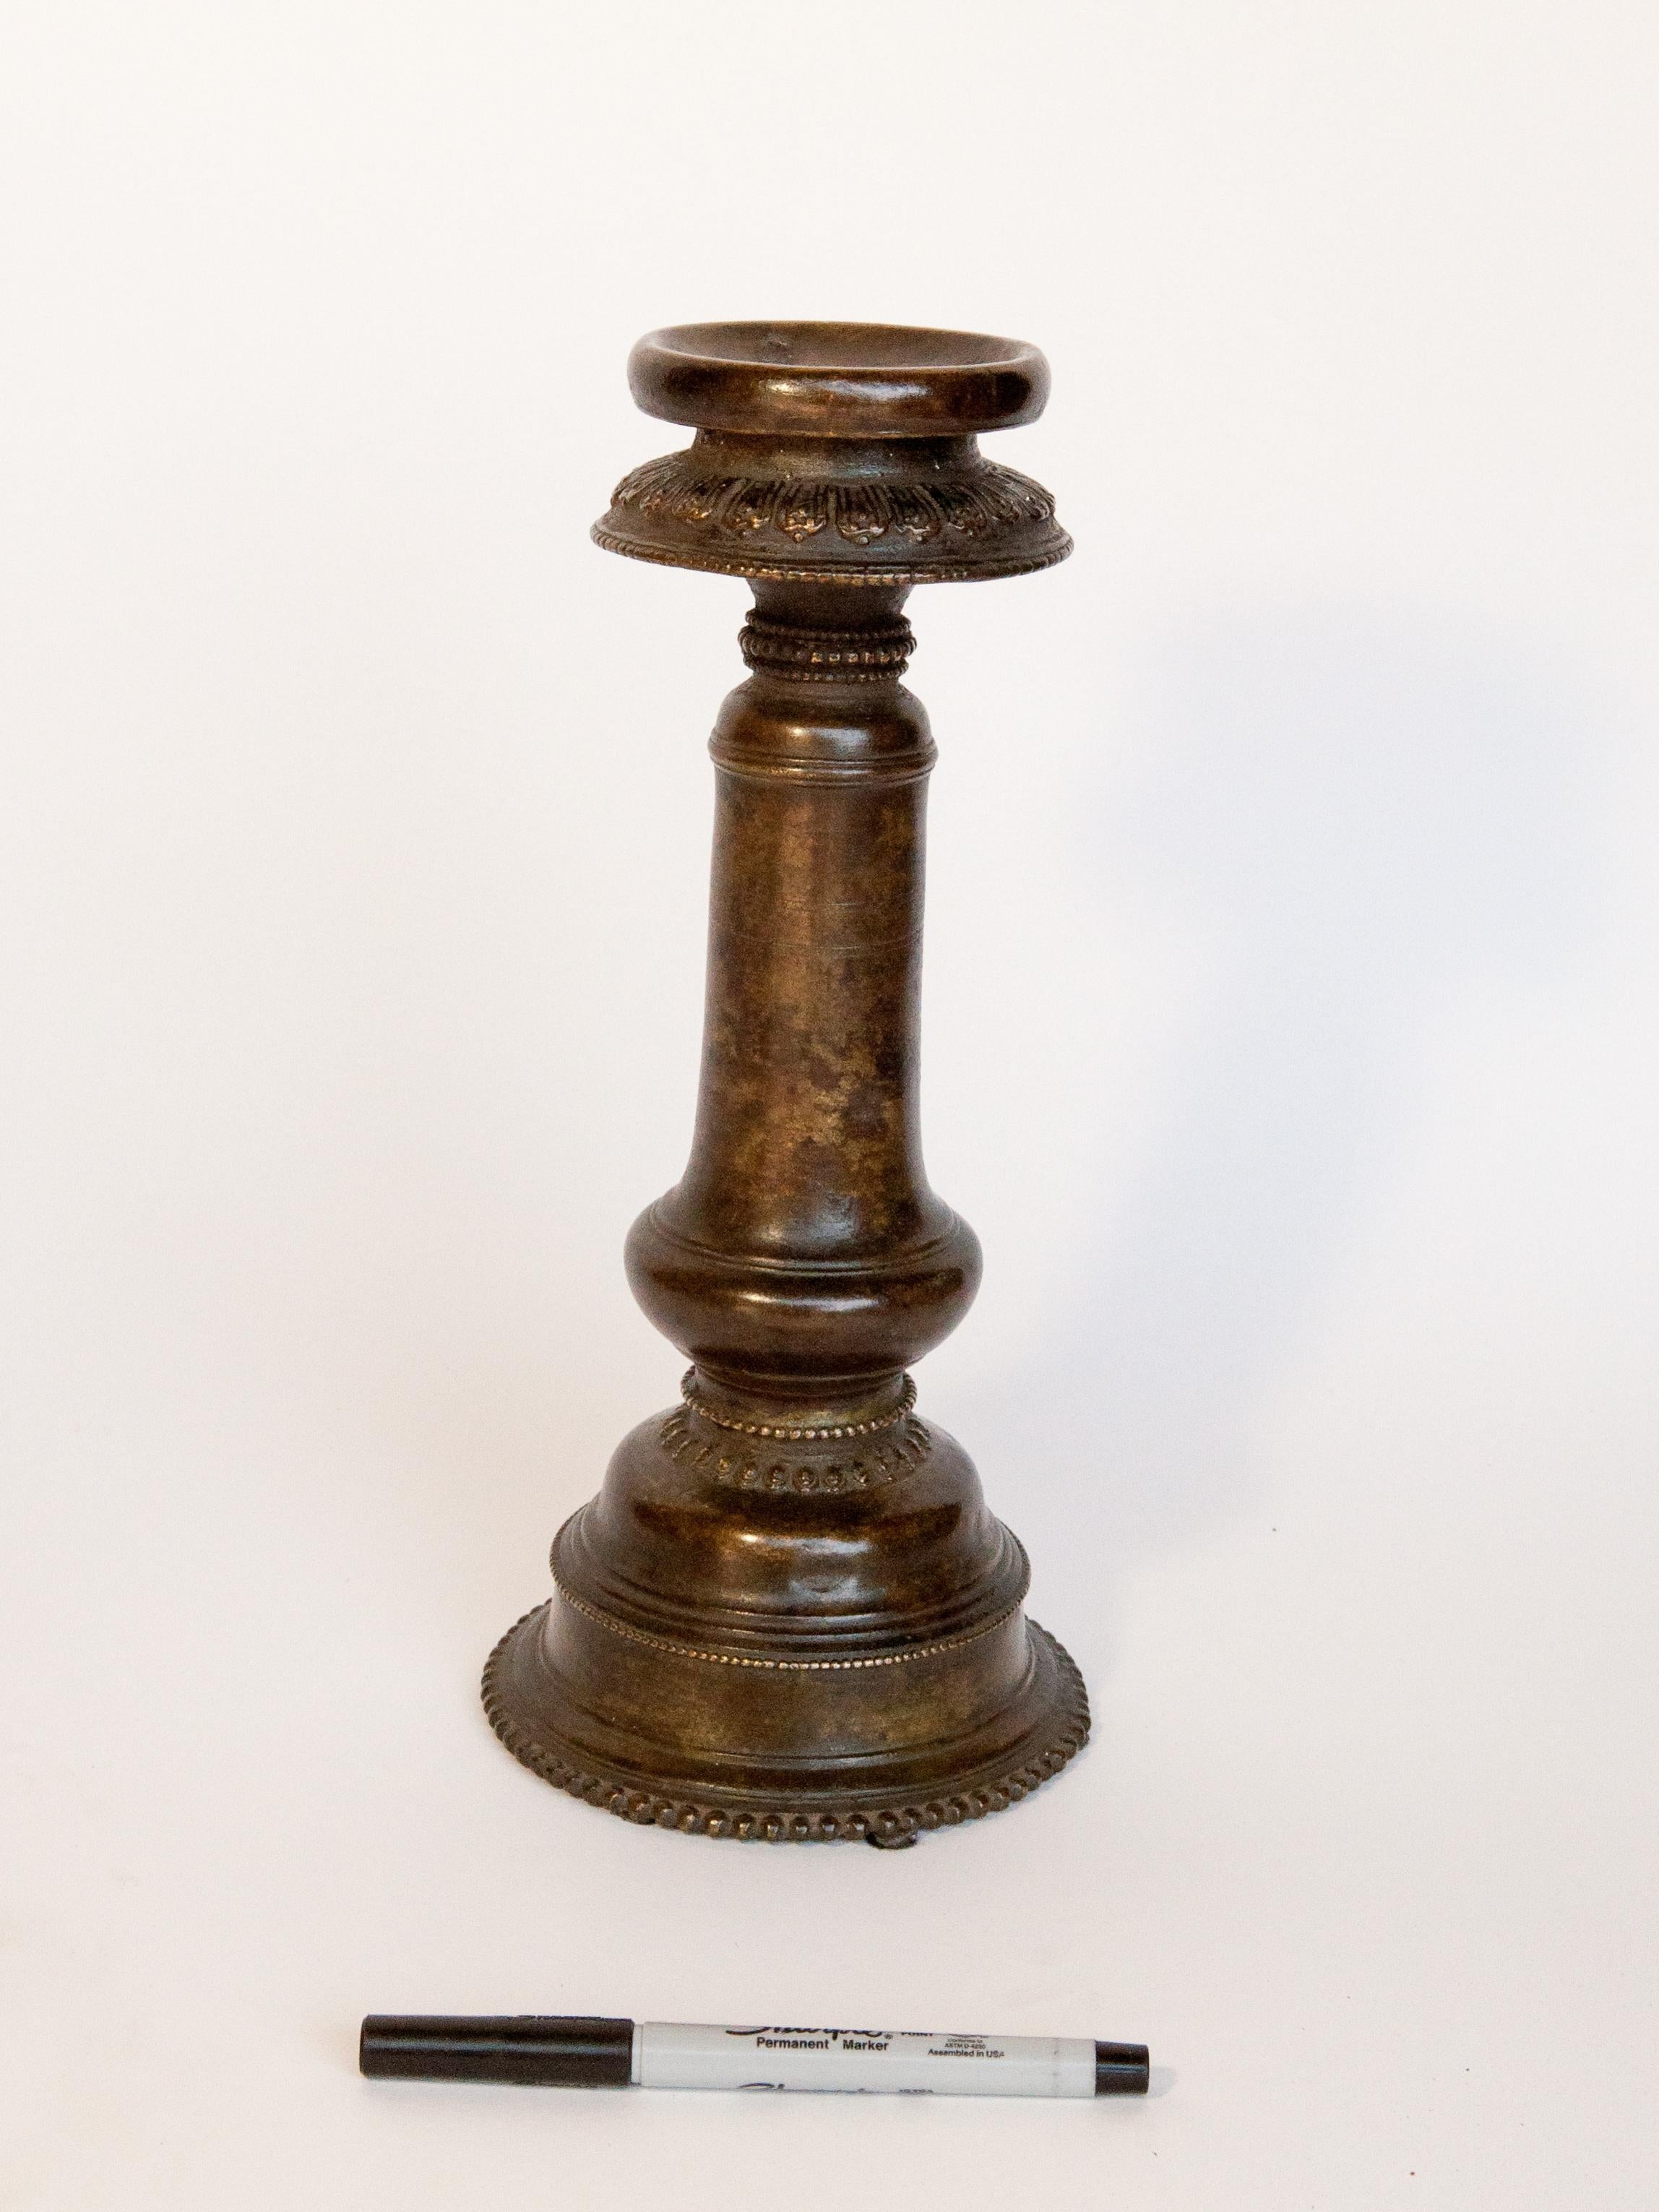 Vintage bronze oil lamp. Newar of Kathmandu Valley, Nepal, Mid-20th century.
The Newar of the Kathmandu Valley are renowned for their metal work. This somewhat rustic lamp has a lotus motif, and a rich natural patina. Such lamps are important